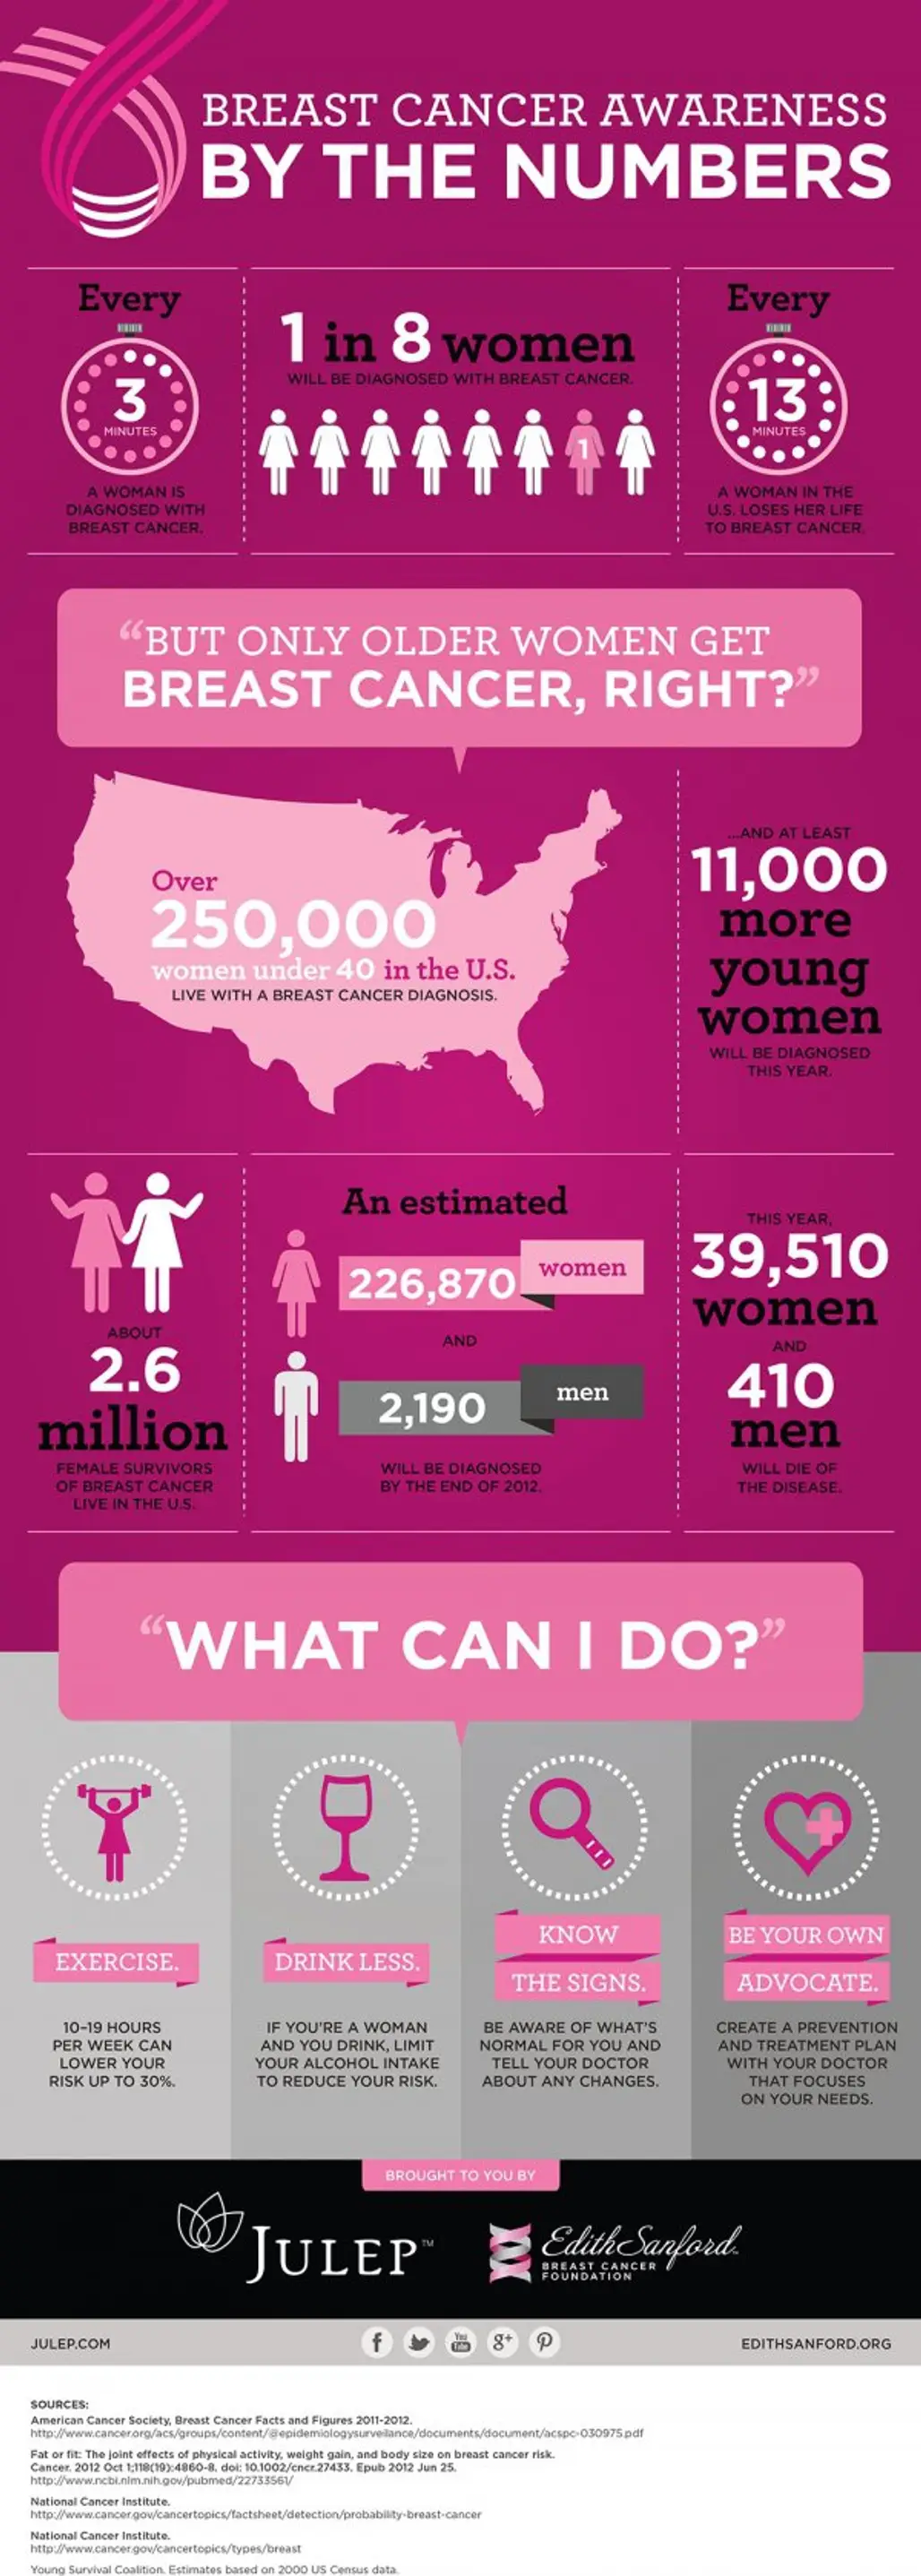 Breast Cancer Awareness by the Numbers